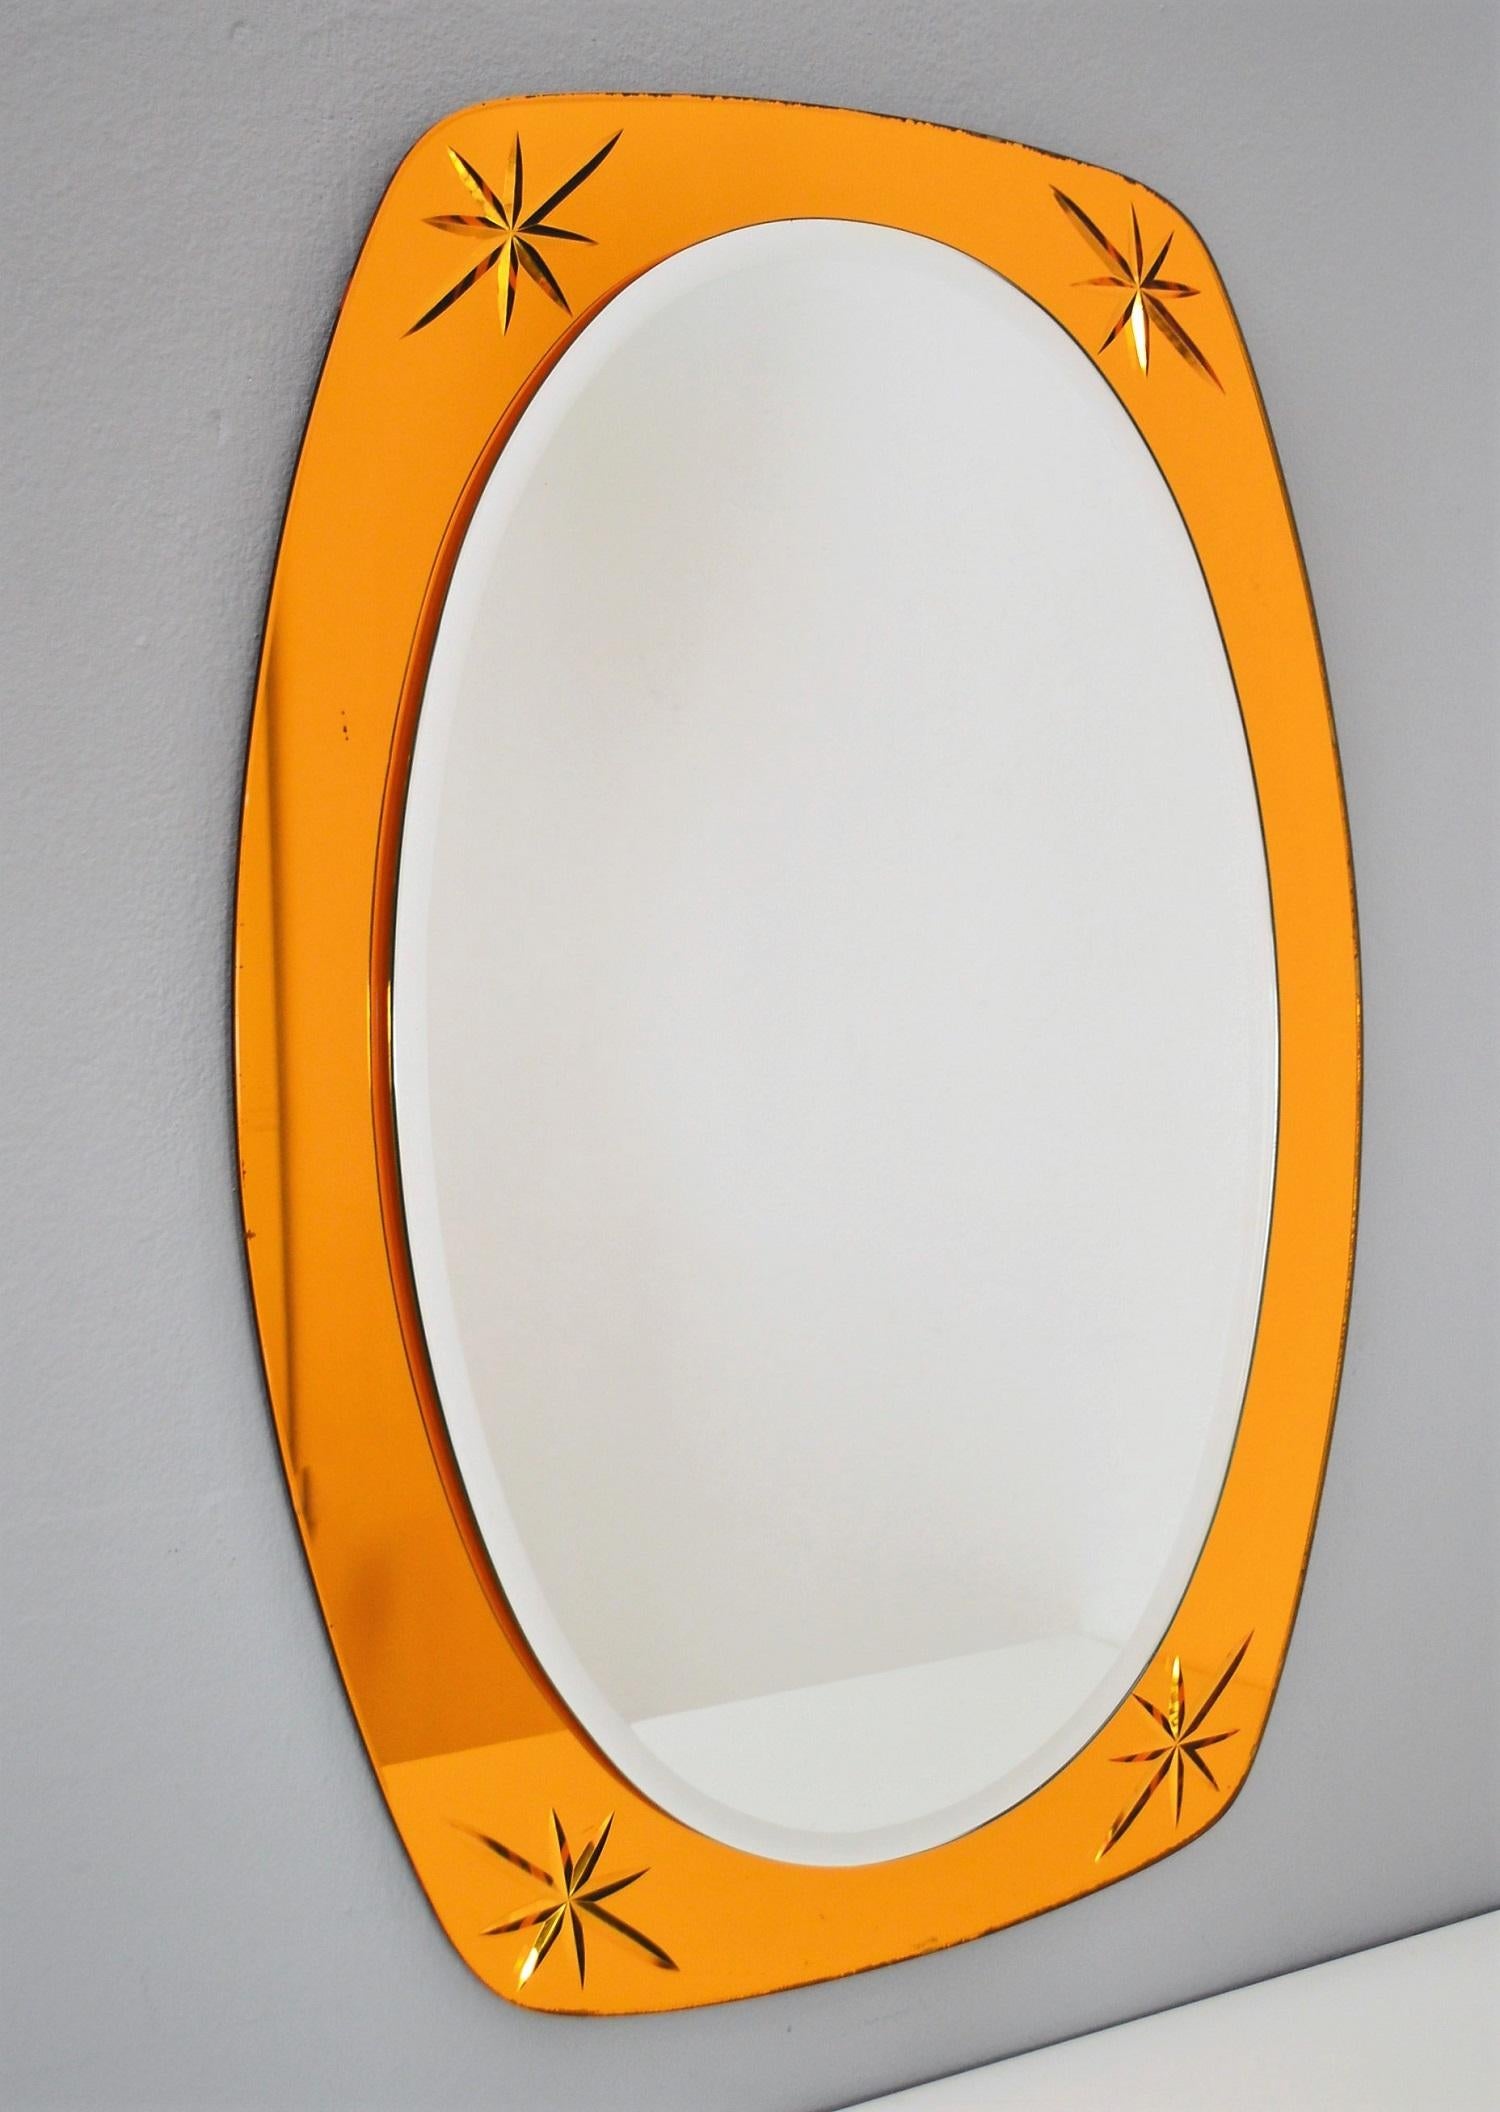 Gorgeous wall mirror with stunning shiny golden - yellow color.
Typical work of the 1960s, Made in Italy.
The mirror is made of two glass layers, the upper one is with cut border all around.
The bigger, golden-yellow one, has 4 cut stars inside